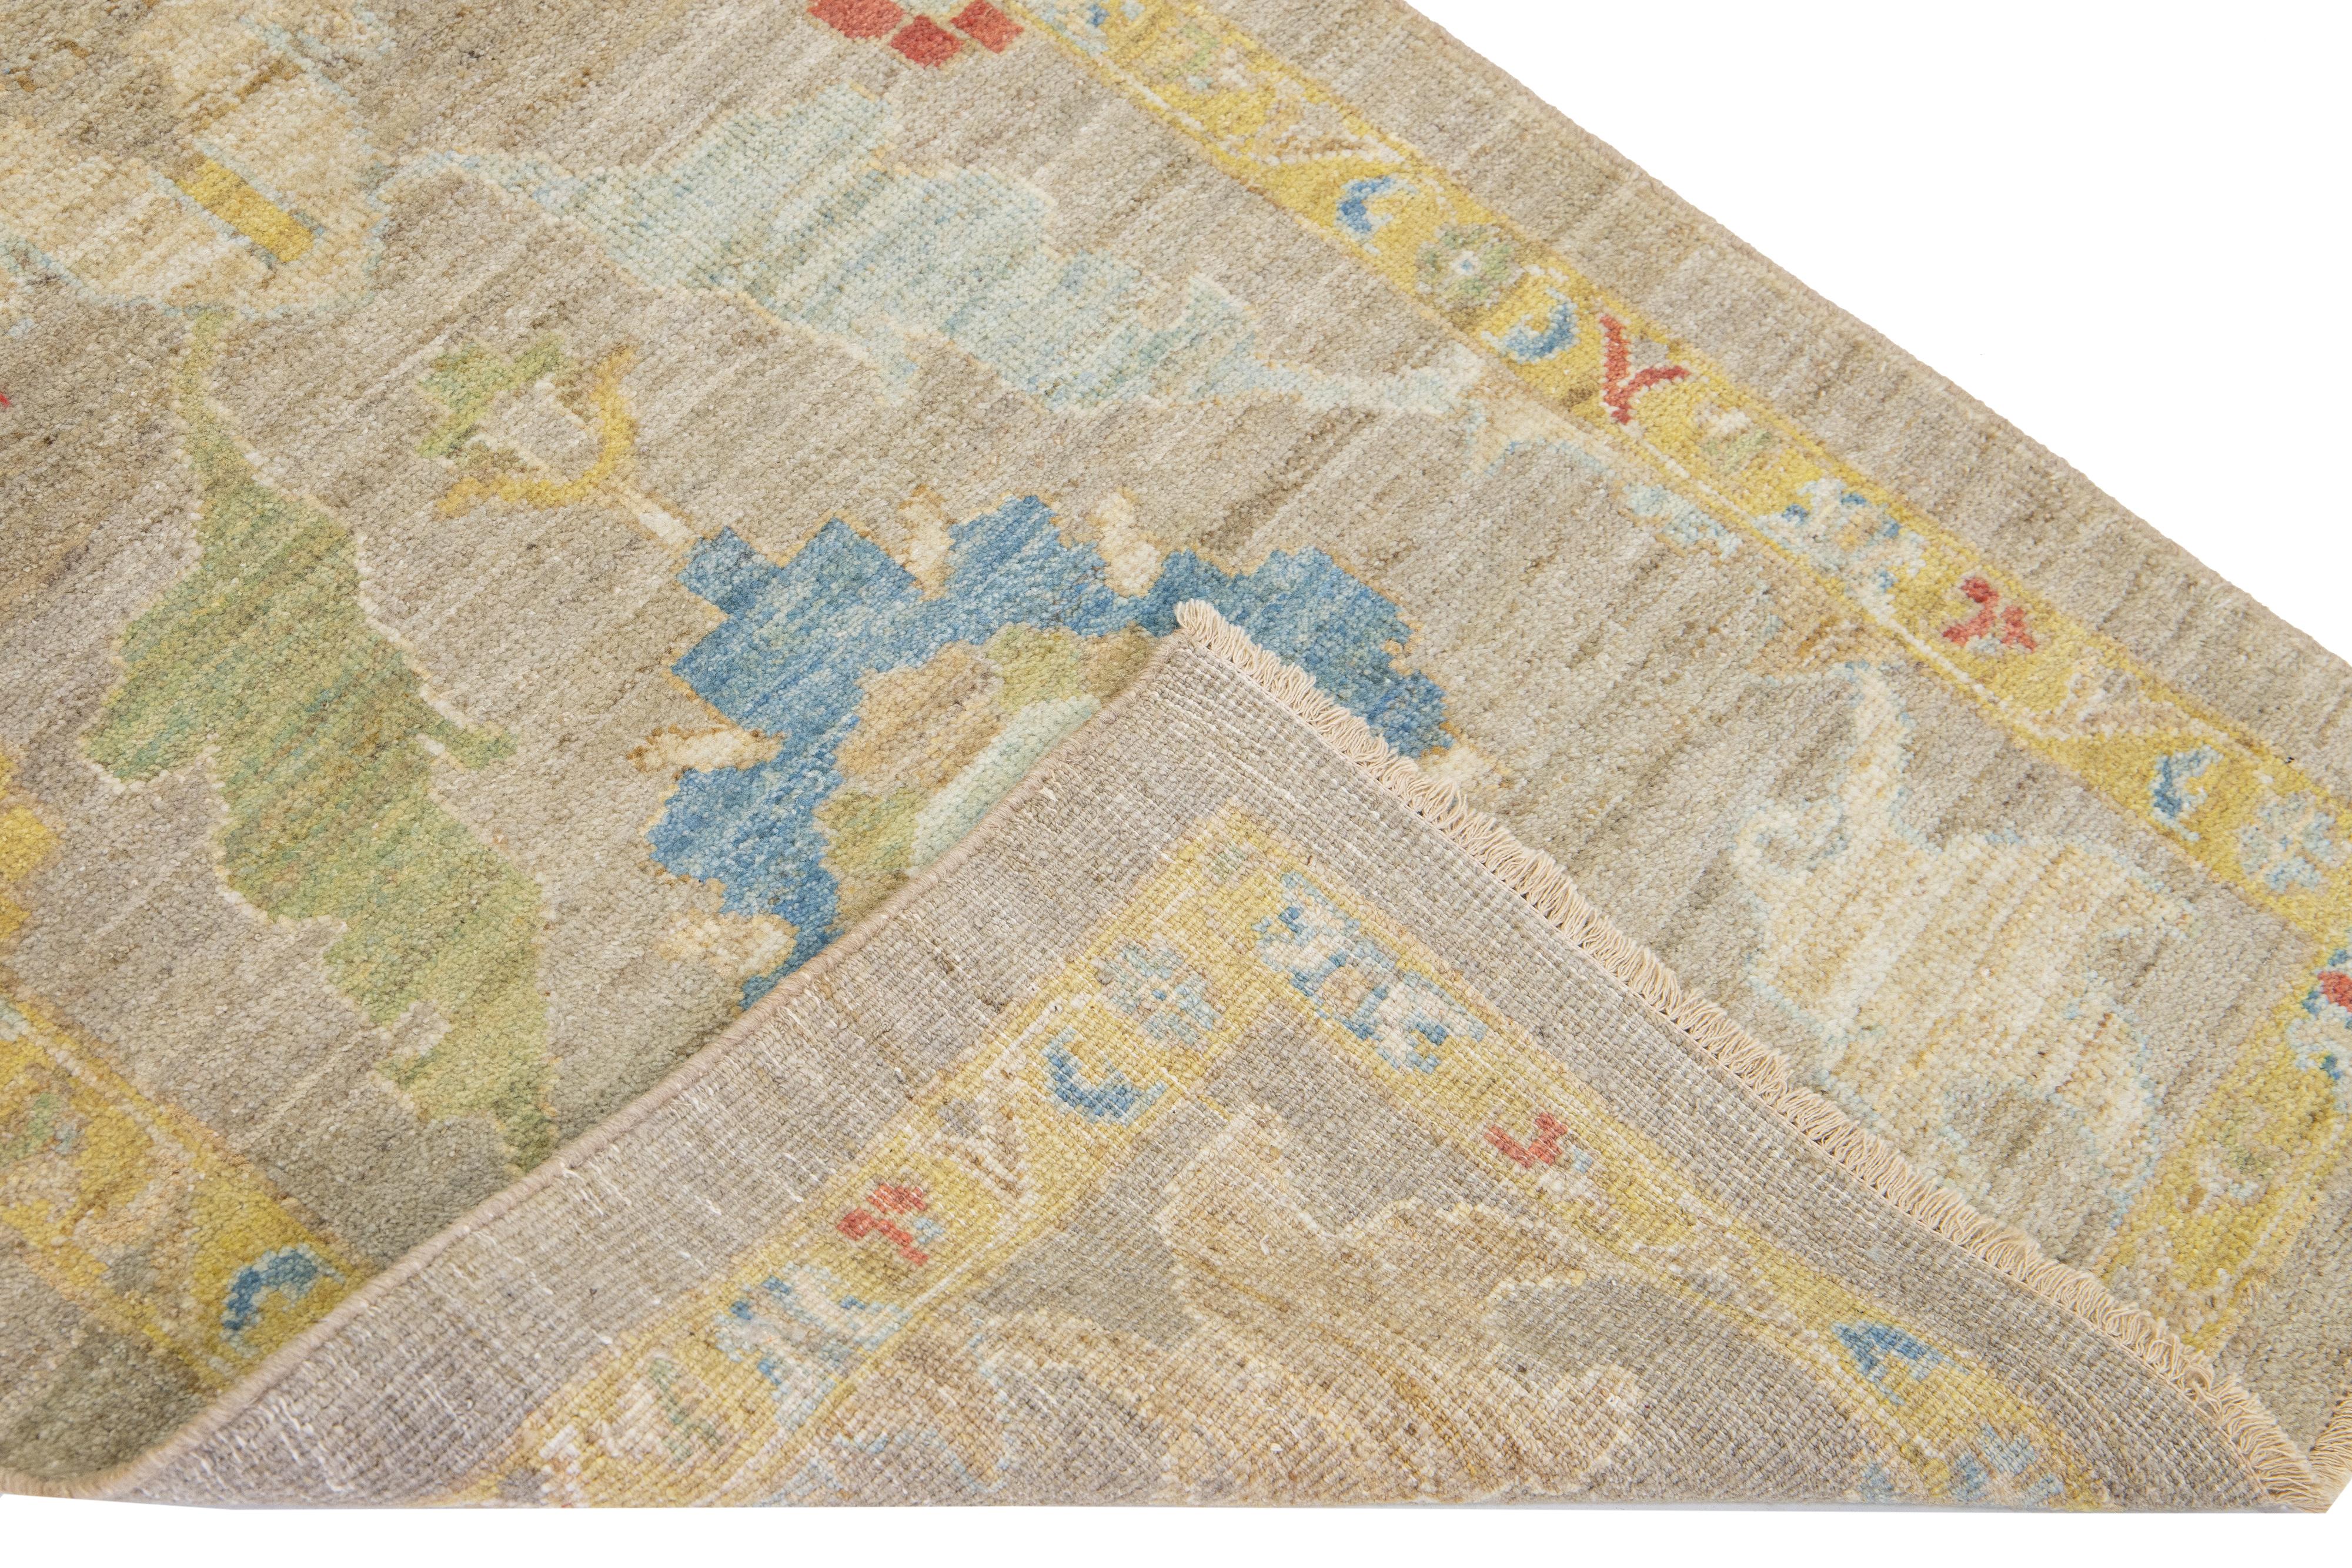 Beautiful modern Mahal hand-knotted wool runner with a brown field. This Piece has a yellow-designed frame and multicolor accent colors in a gorgeous all-over Classic floral design.

This rug measures: 2'10